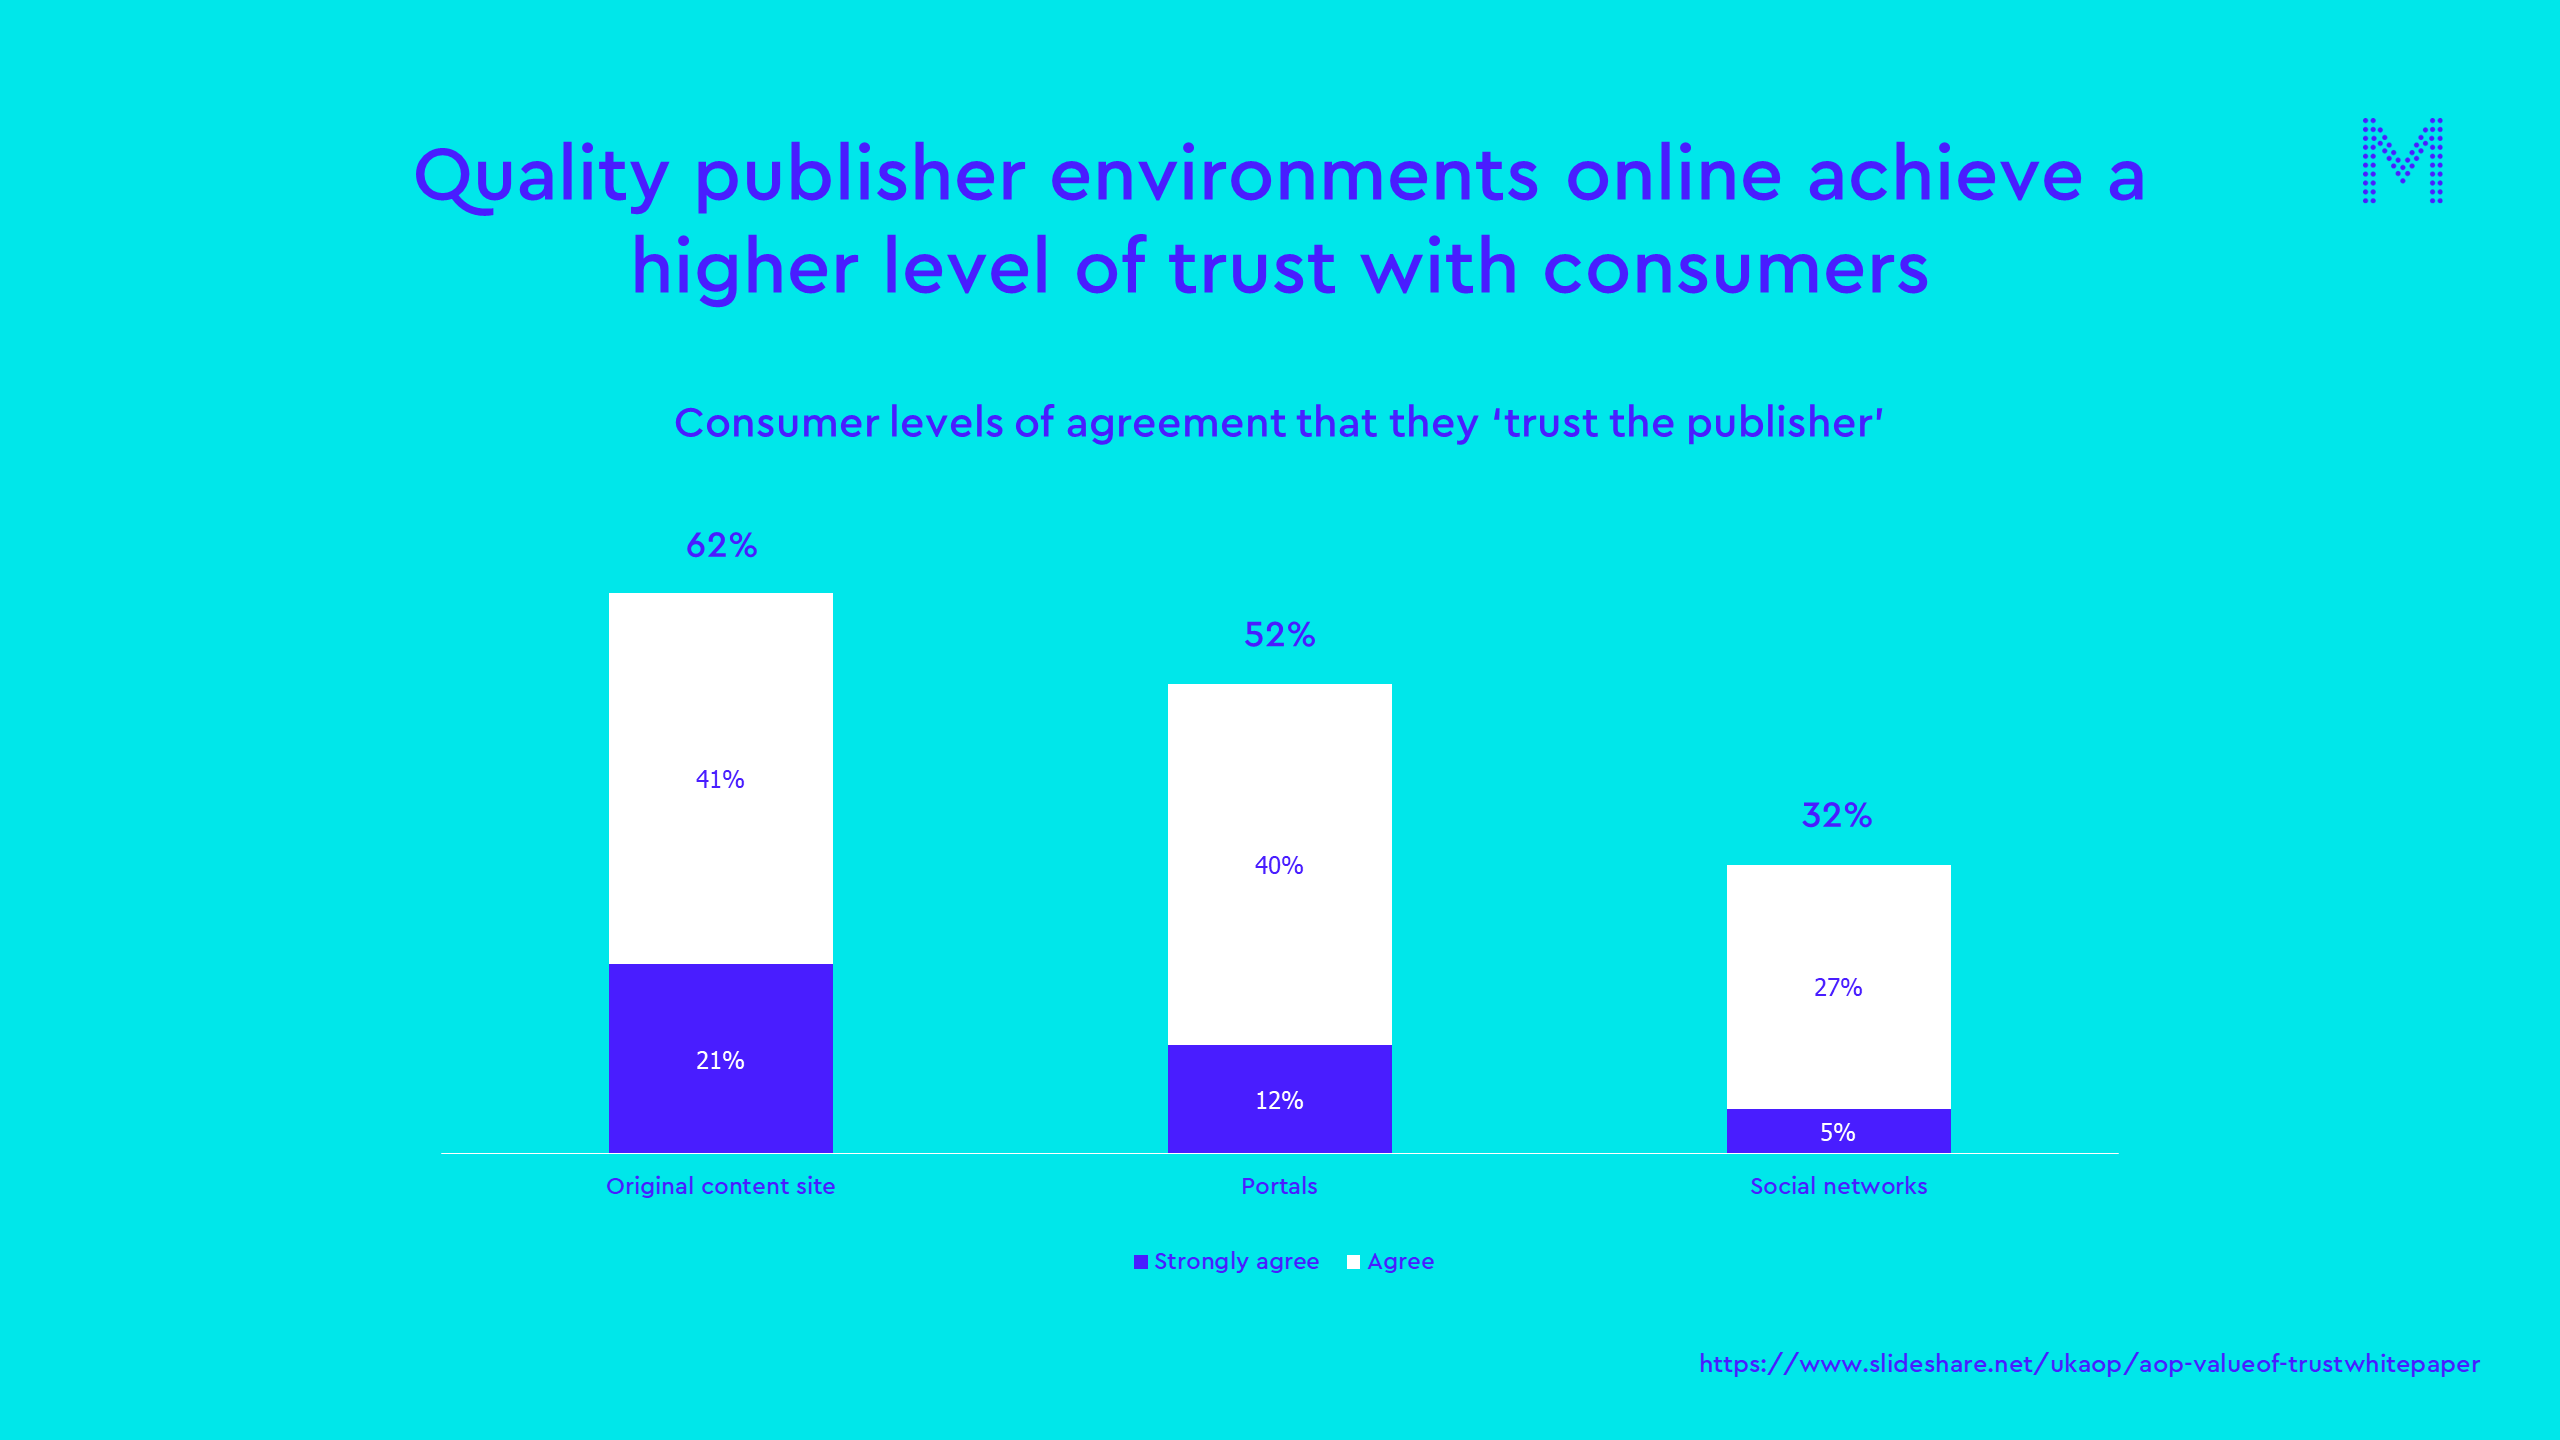 Quality publisher environments and trust